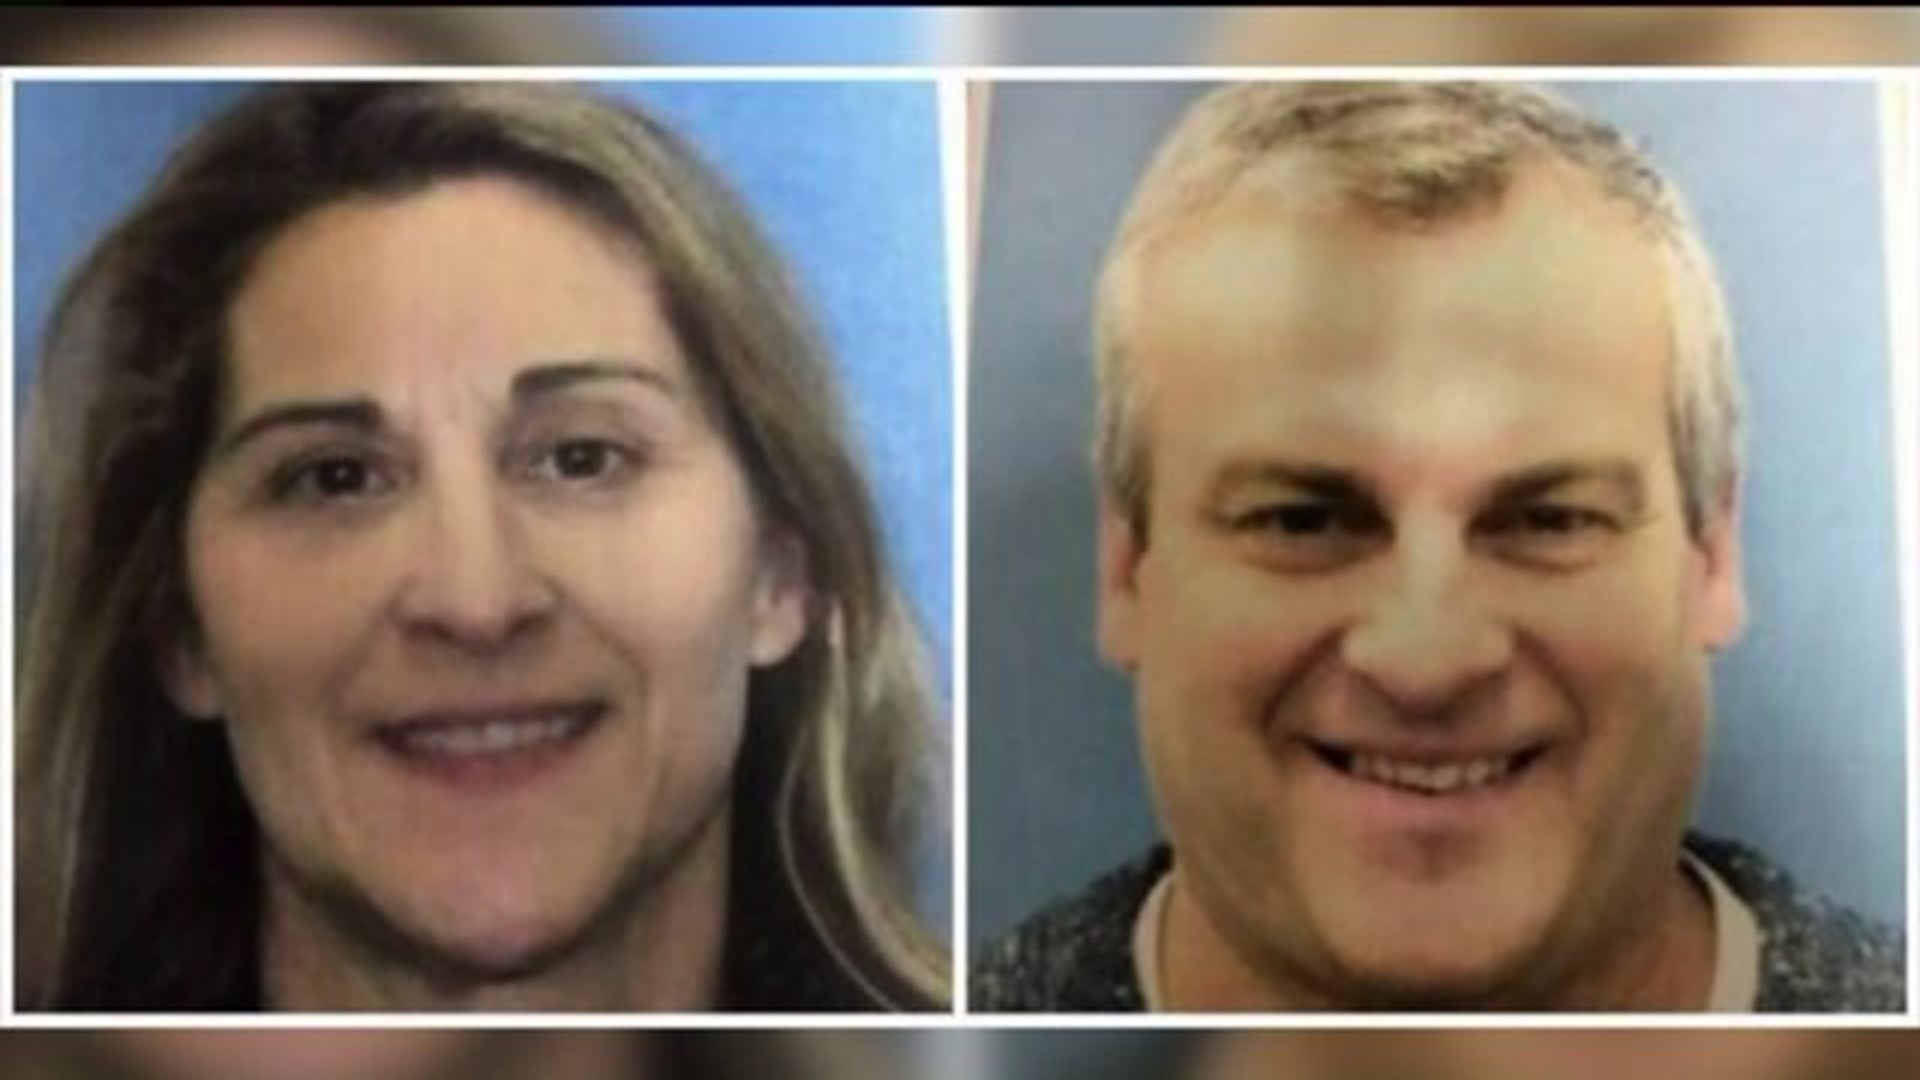 Investigation into missing Easton couple contiues as bodies are found, son named suspect